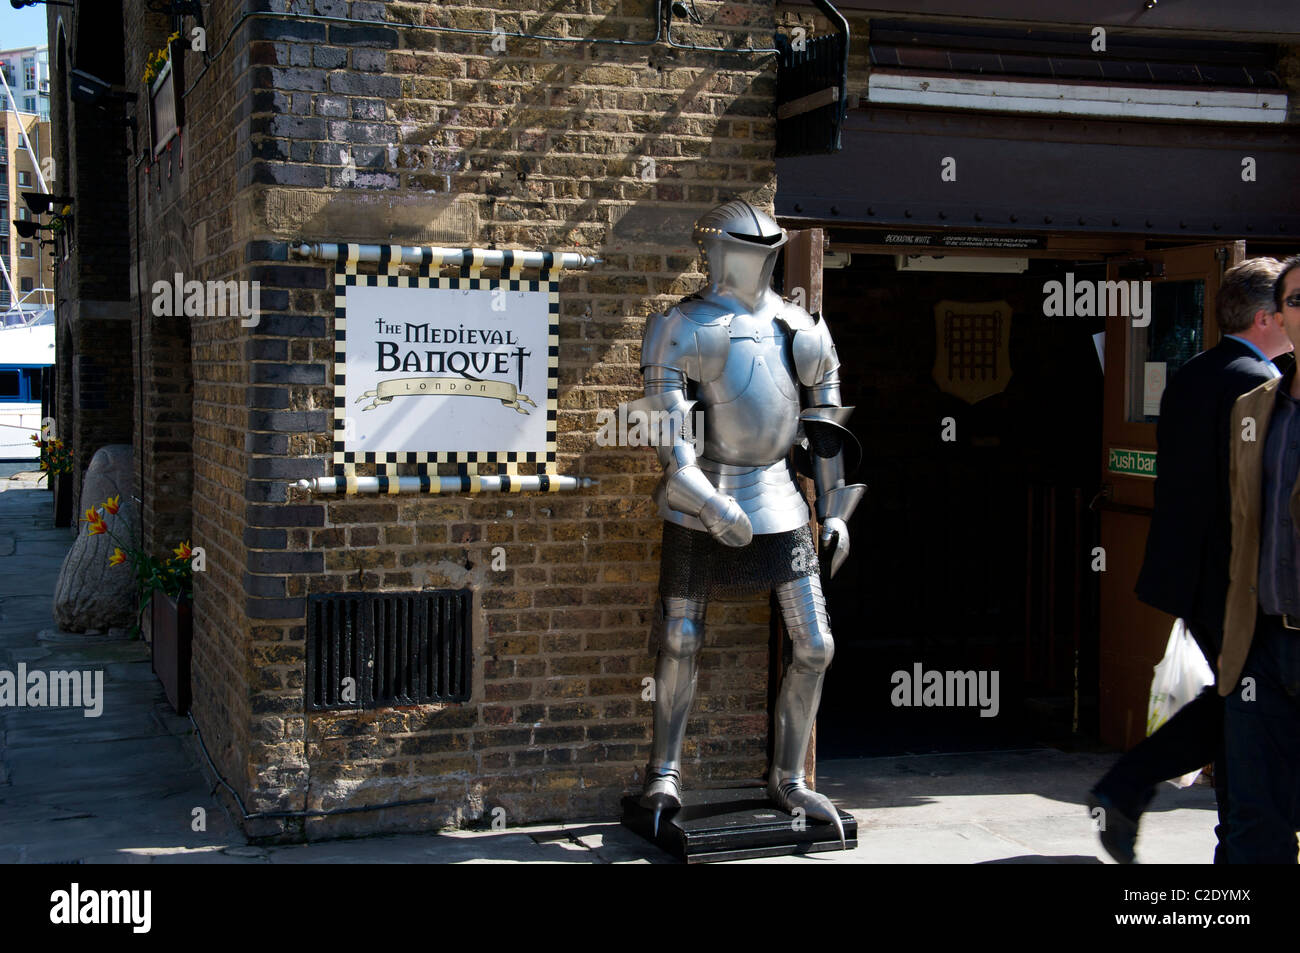 Suit of armour outside the Medieval Banquet restaurant, St Katherine's Dock, London, England UK Stock Photo